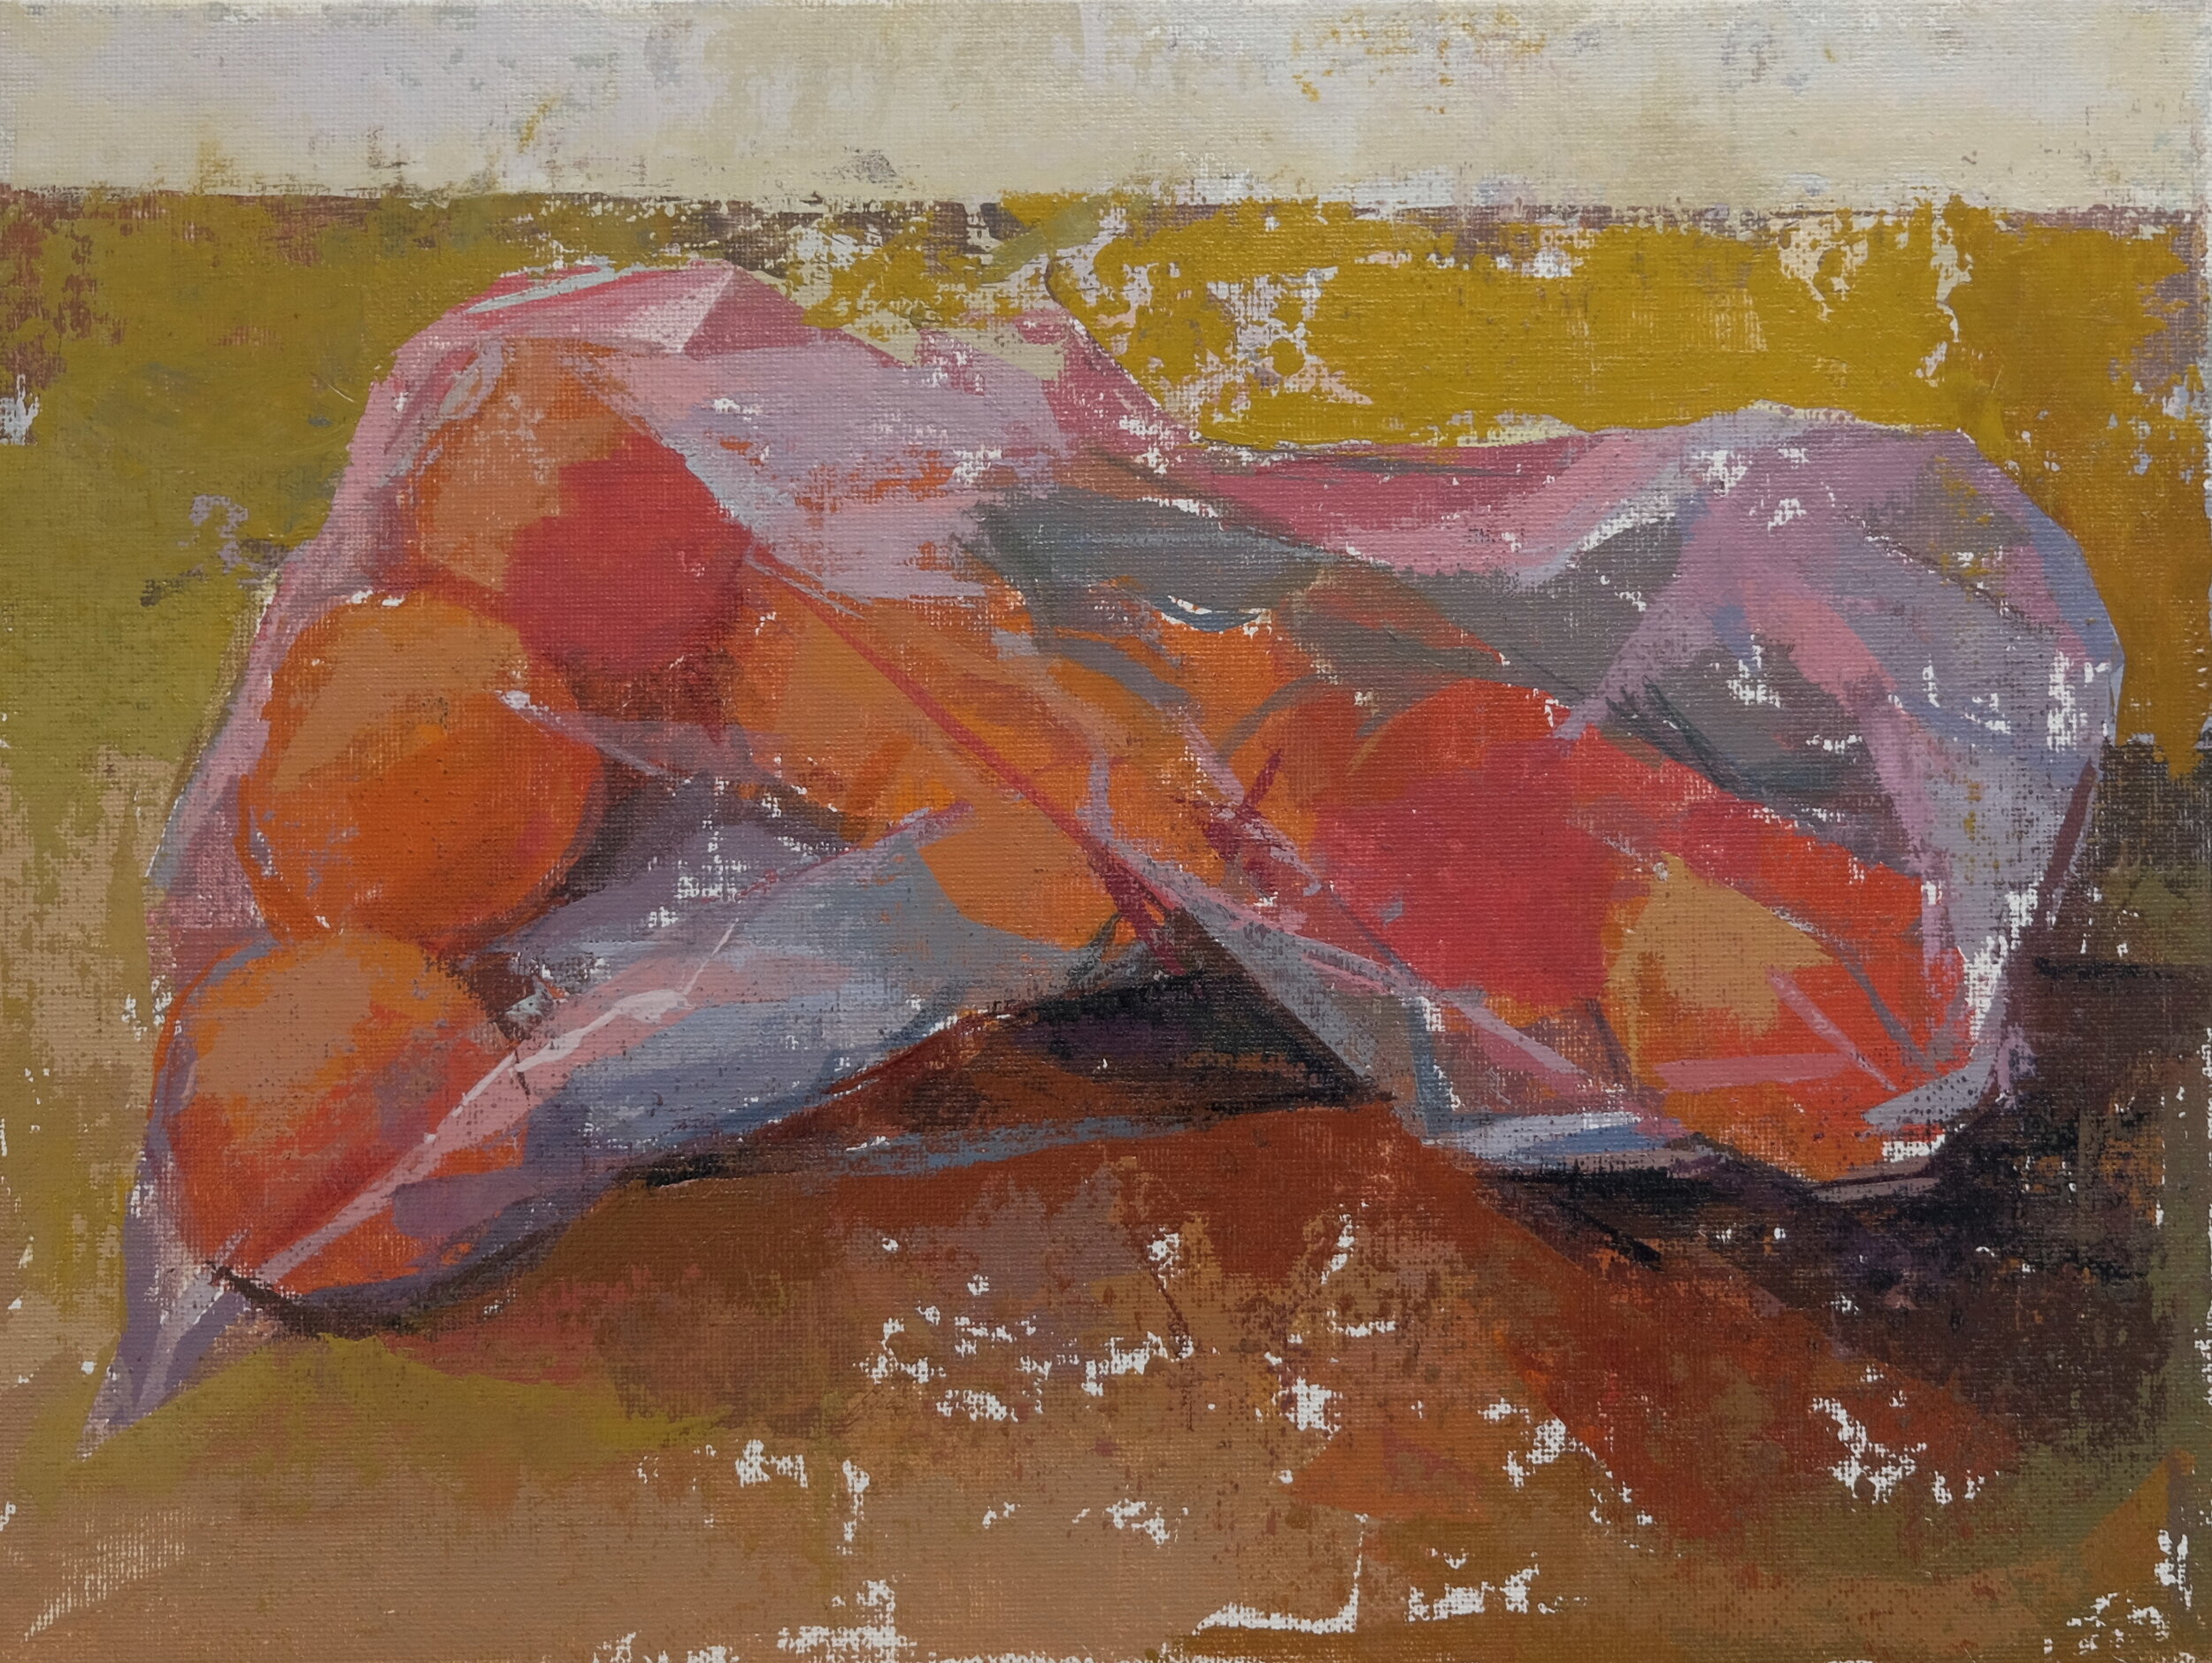 a scherer Oranges in Pink Bag acrylic on canvas board 9x12 inches.JPG